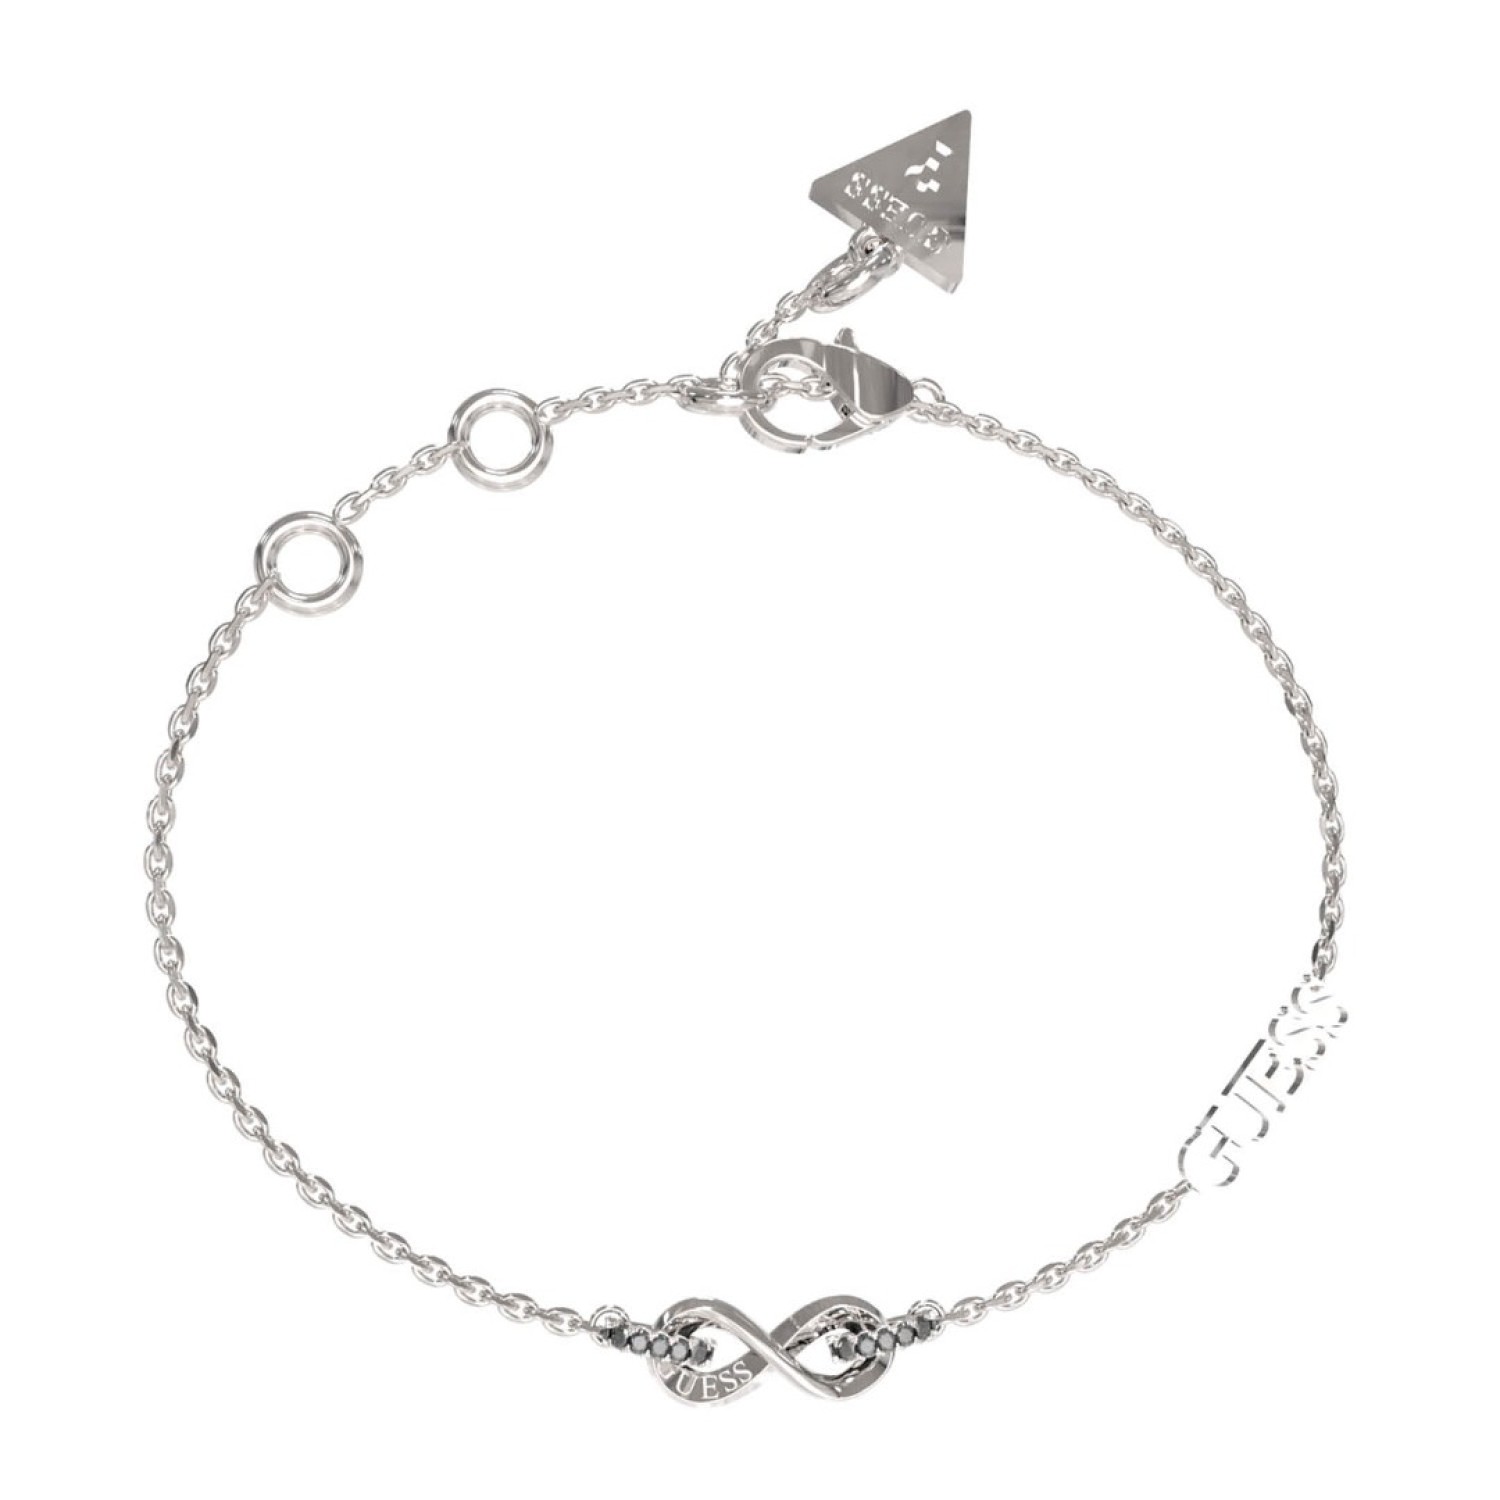 GUESS Silver Infinity Pave Links Bracelet JUBB03265JWRHL JUBB03265JWYGL Guess Jewellery Auckland | GUESS jewellery effortlessly transitions from daytime to nighttime wear, Fast Free Delivery from Auckland